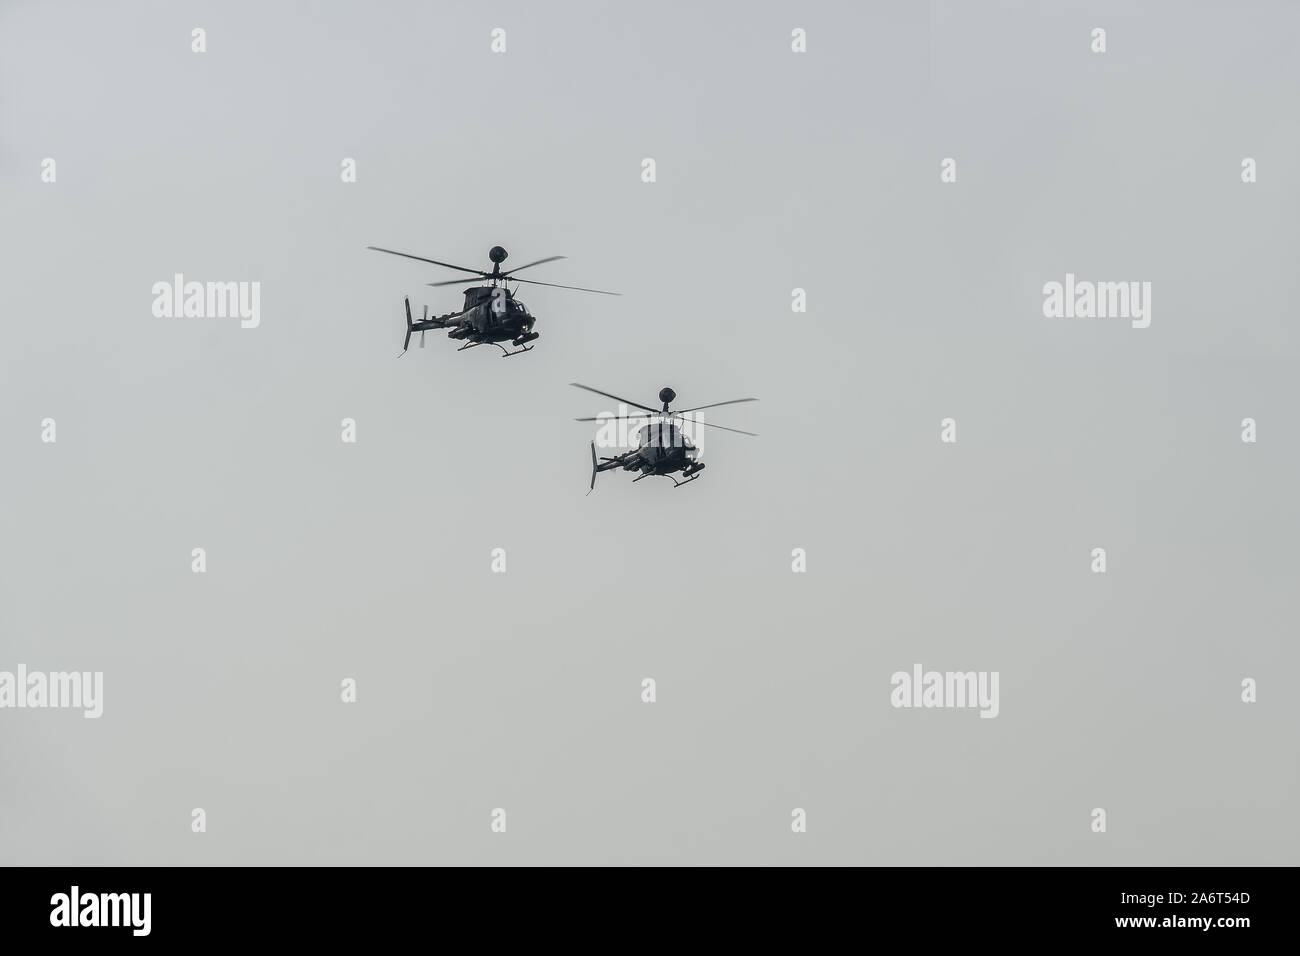 Thessaloniki Oxi Day Greek Army helicopters parade. Fly during national day celebration military parade for Greek no against Italian 1940 ultimatum. Stock Photo